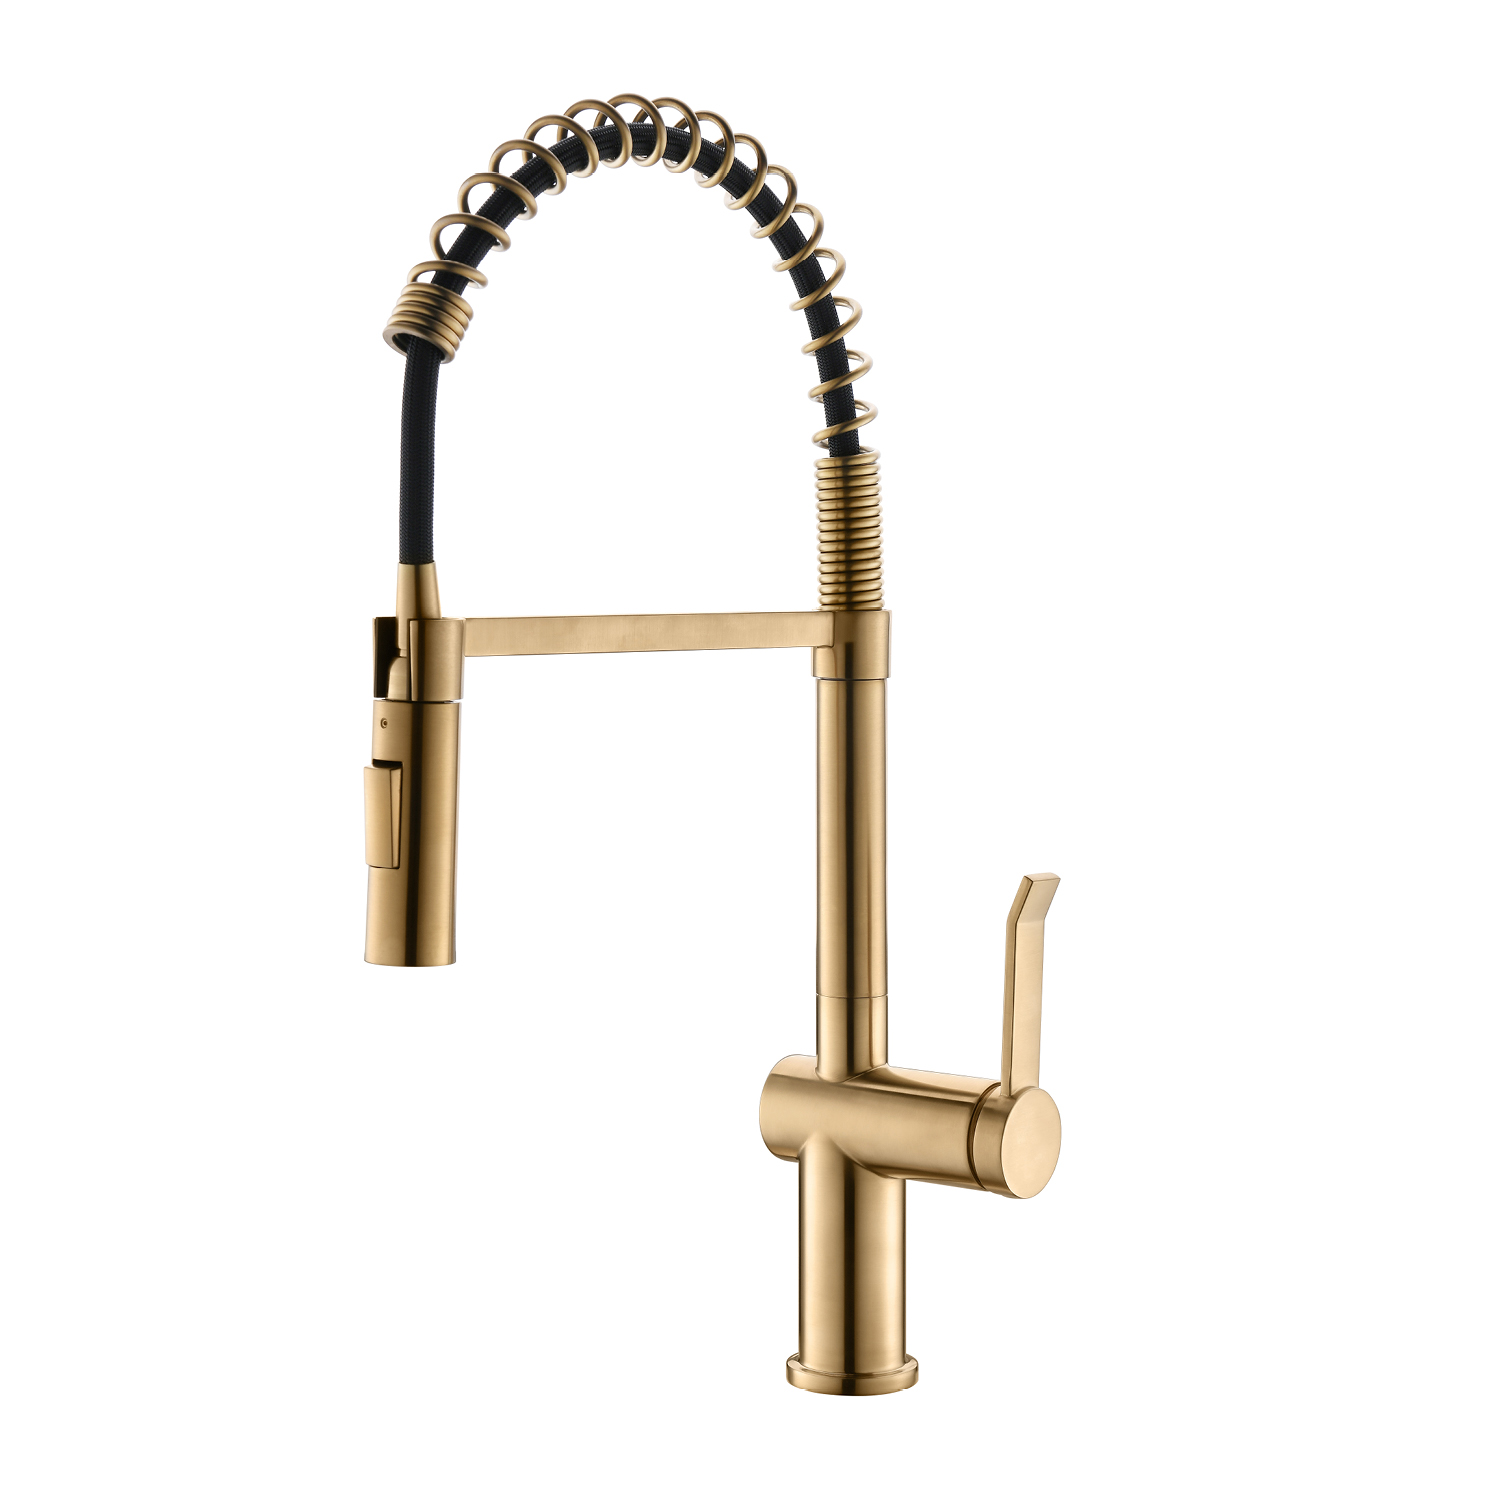 Kaiping Excellent Quality Hot And Cold Water Mixer Cupc Single Hole Brass Modern Pull Out Black Kitchen Faucet